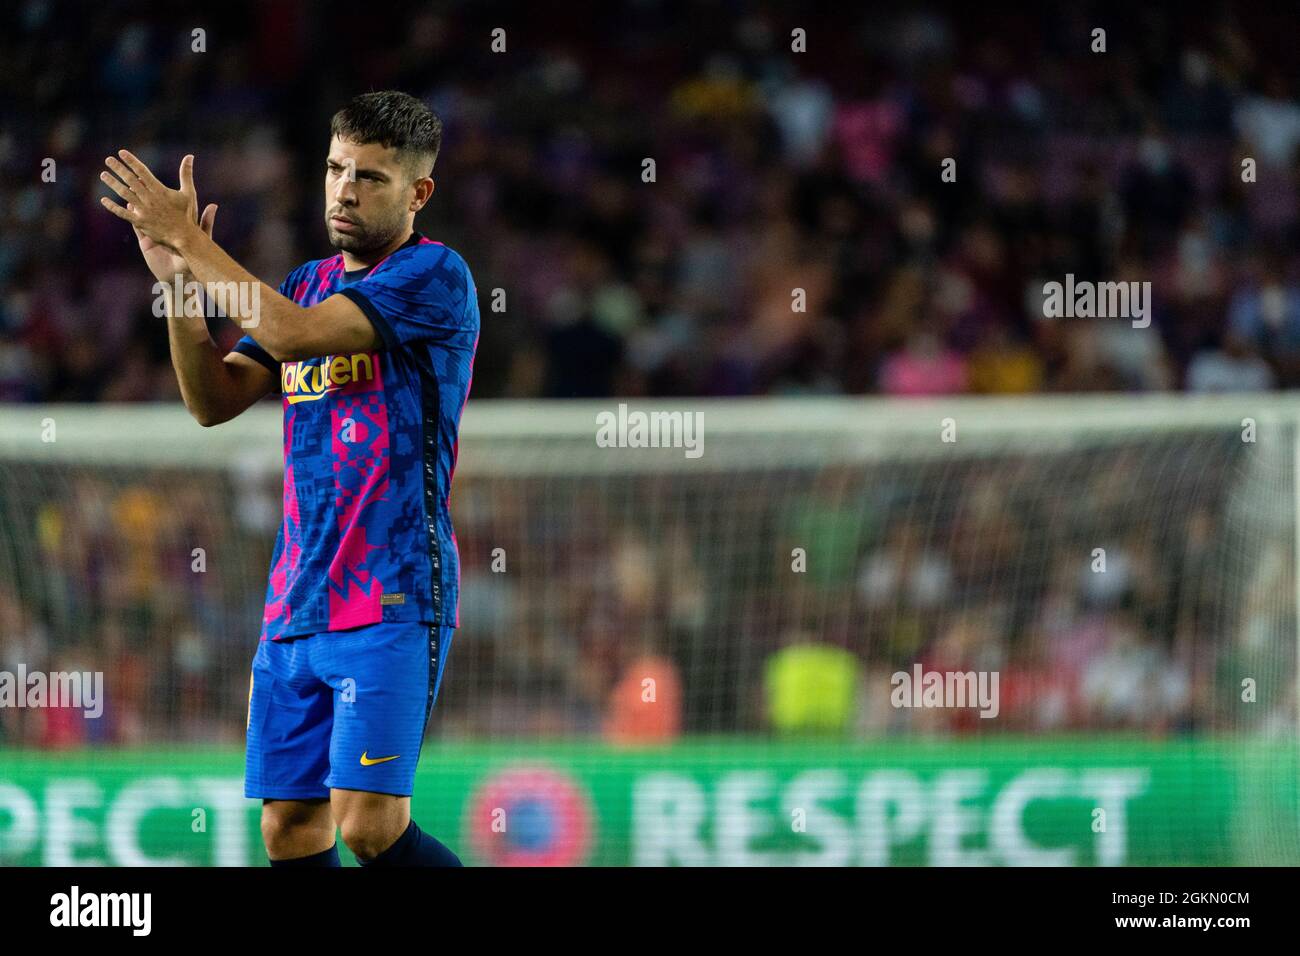 SPAIN, SOCCER, CHAMPIONS LEAGUE, FC BARCELONA VS FC BAYERN MUNICH.  FC Barcelona (18) Jordi Alba applaud the supporters during Champions League group phase match between FC Barcelona and  FC Bayern Munich in Camp Nou, Barcelona, Spain, on September 14, 2021.  © Joan Gosa 2021 Stock Photo